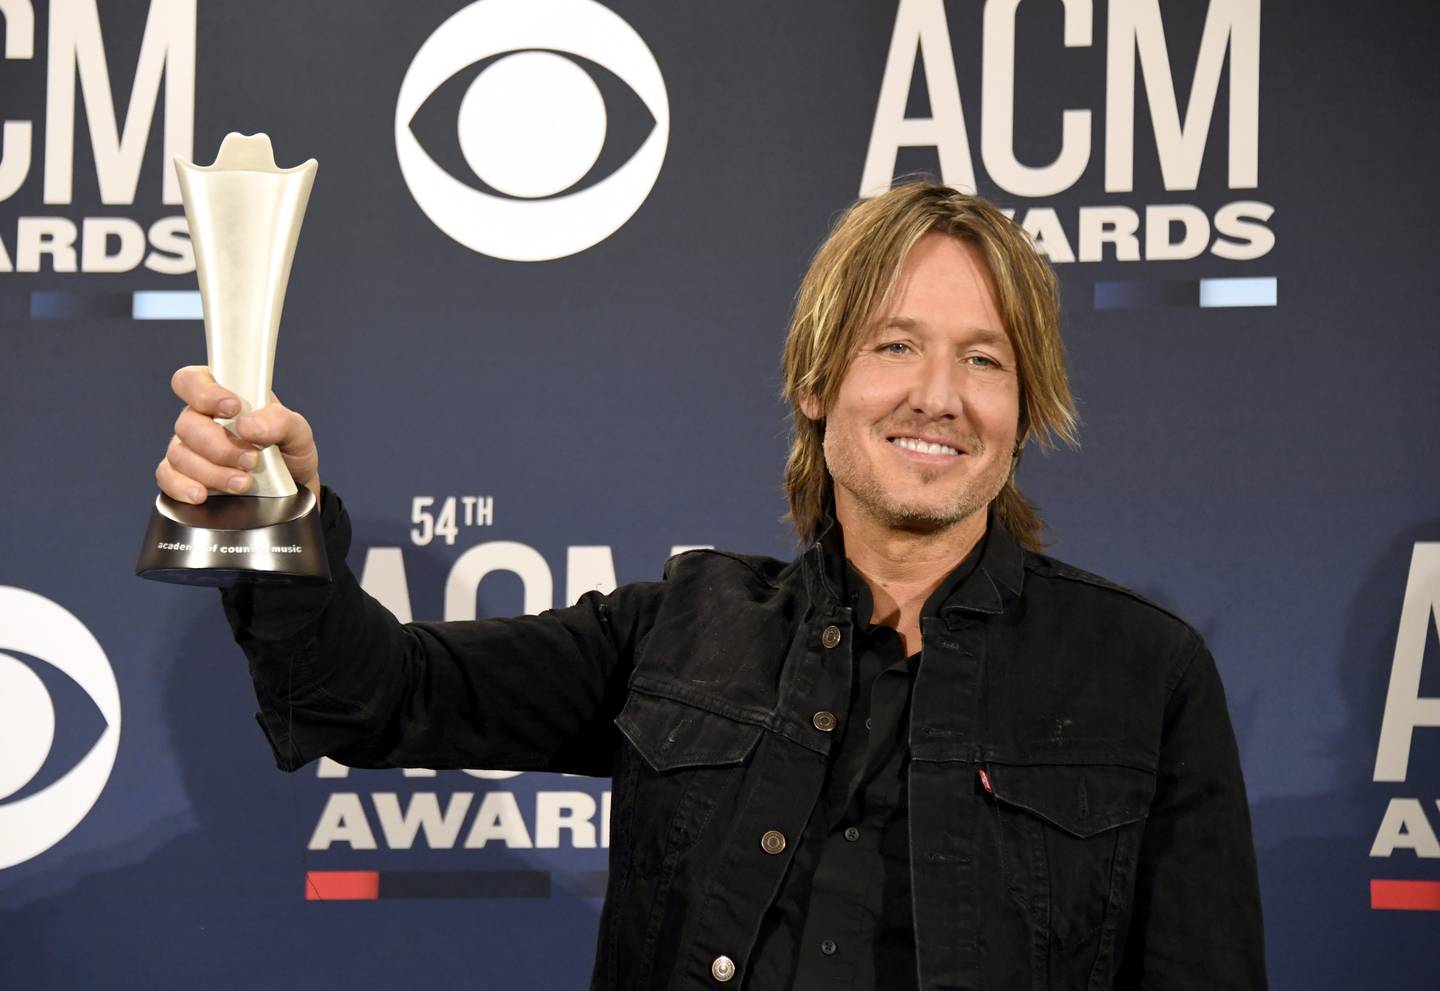 ACM Awards Backstage and Upfront with Keith Urban News CMT